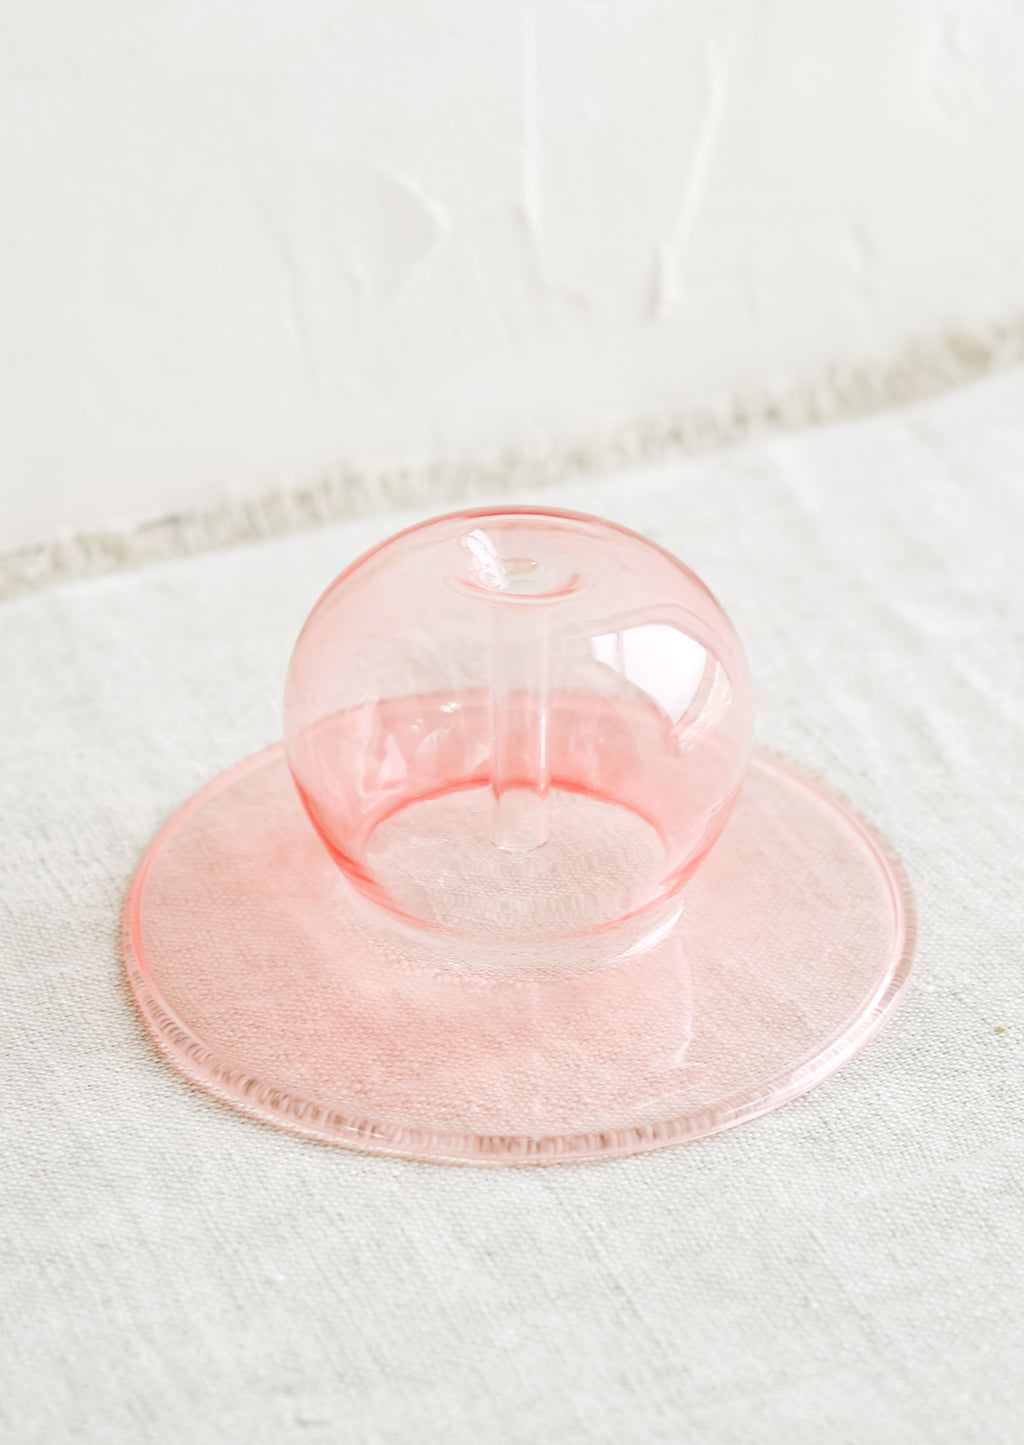 Blush Pink: A pink bubble shaped glass form designed to hold stick incense.